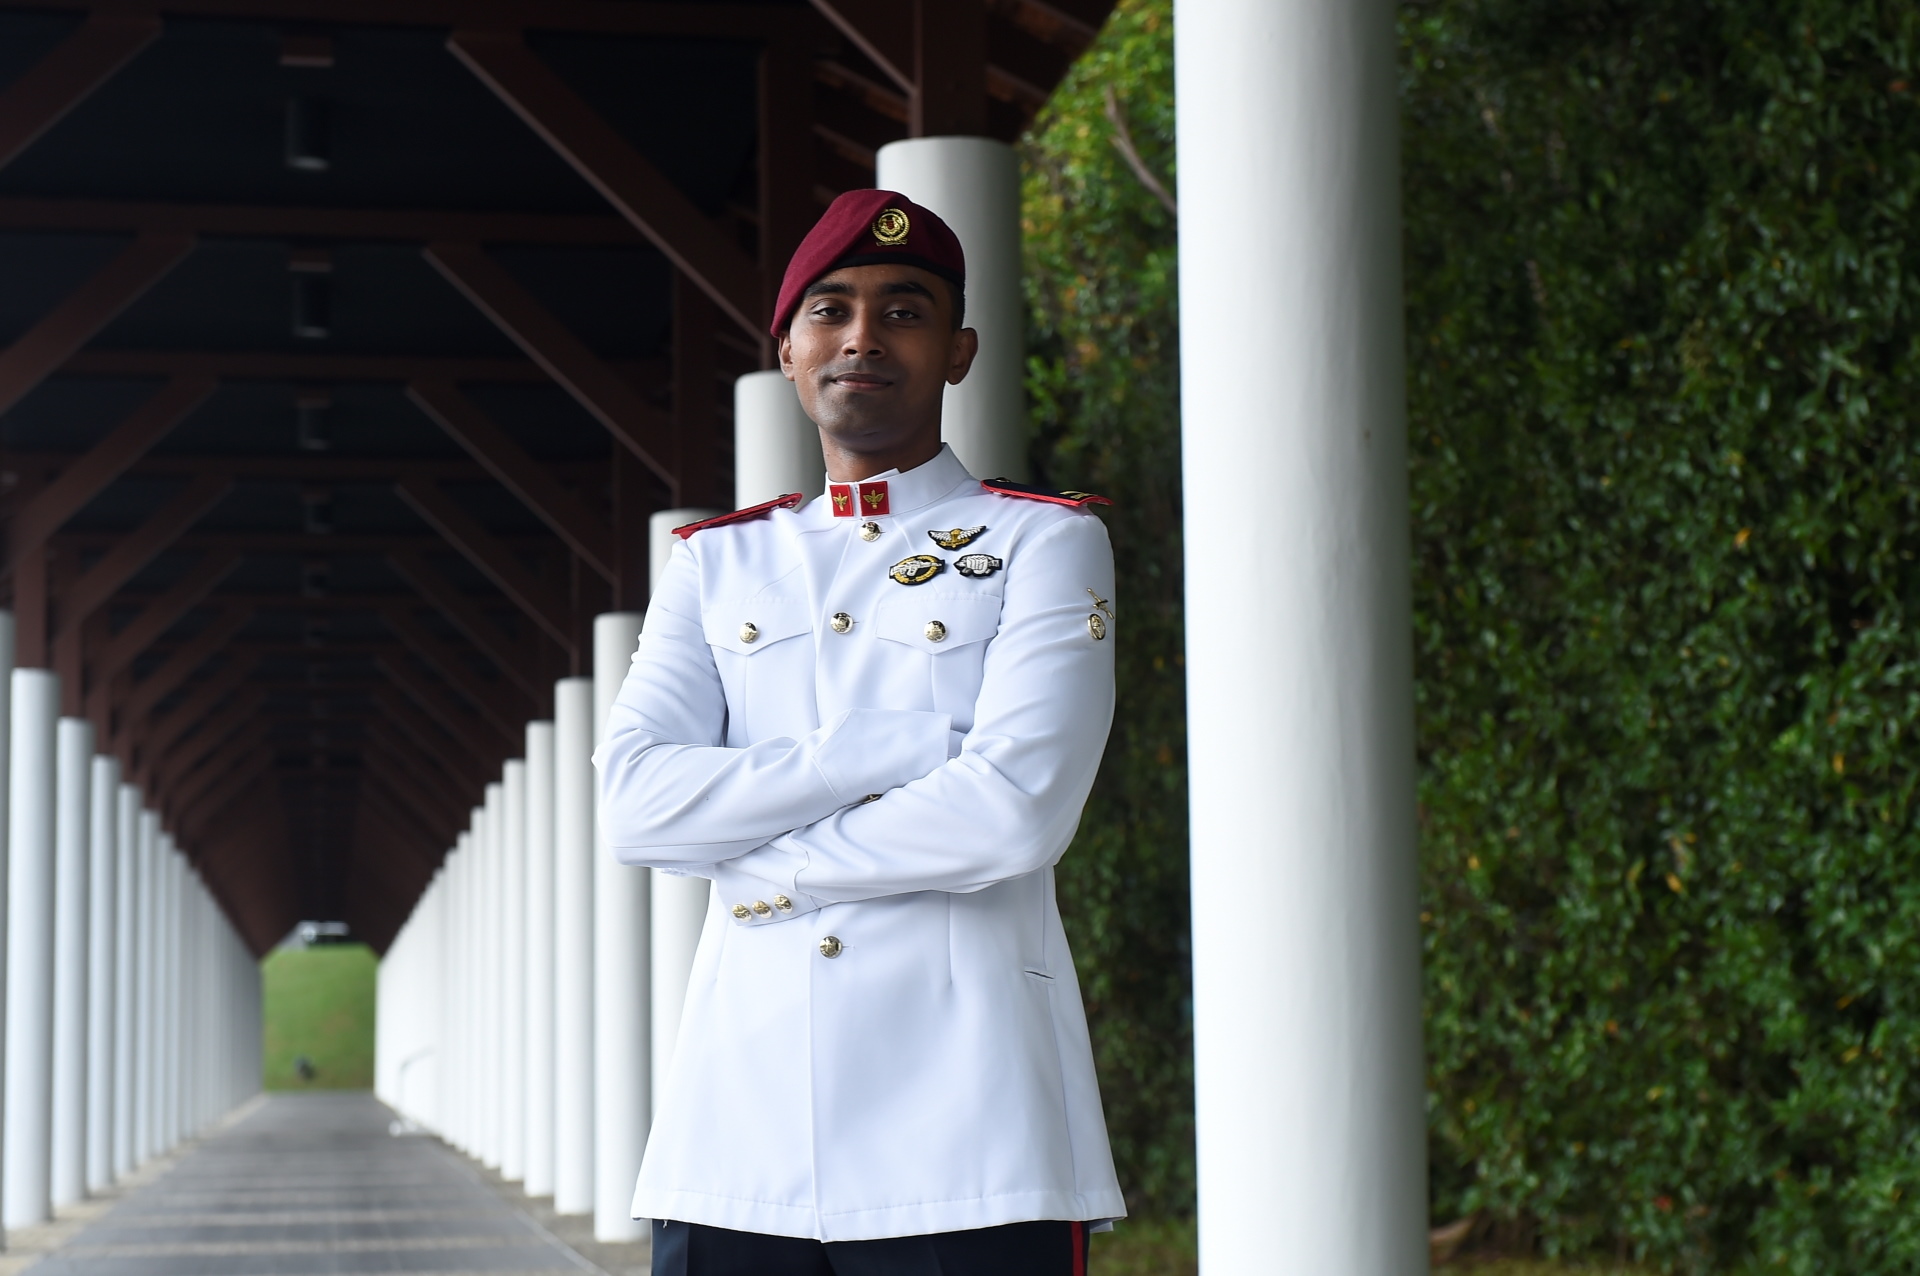 Nothing's impossible for this 26-year-old commando officer